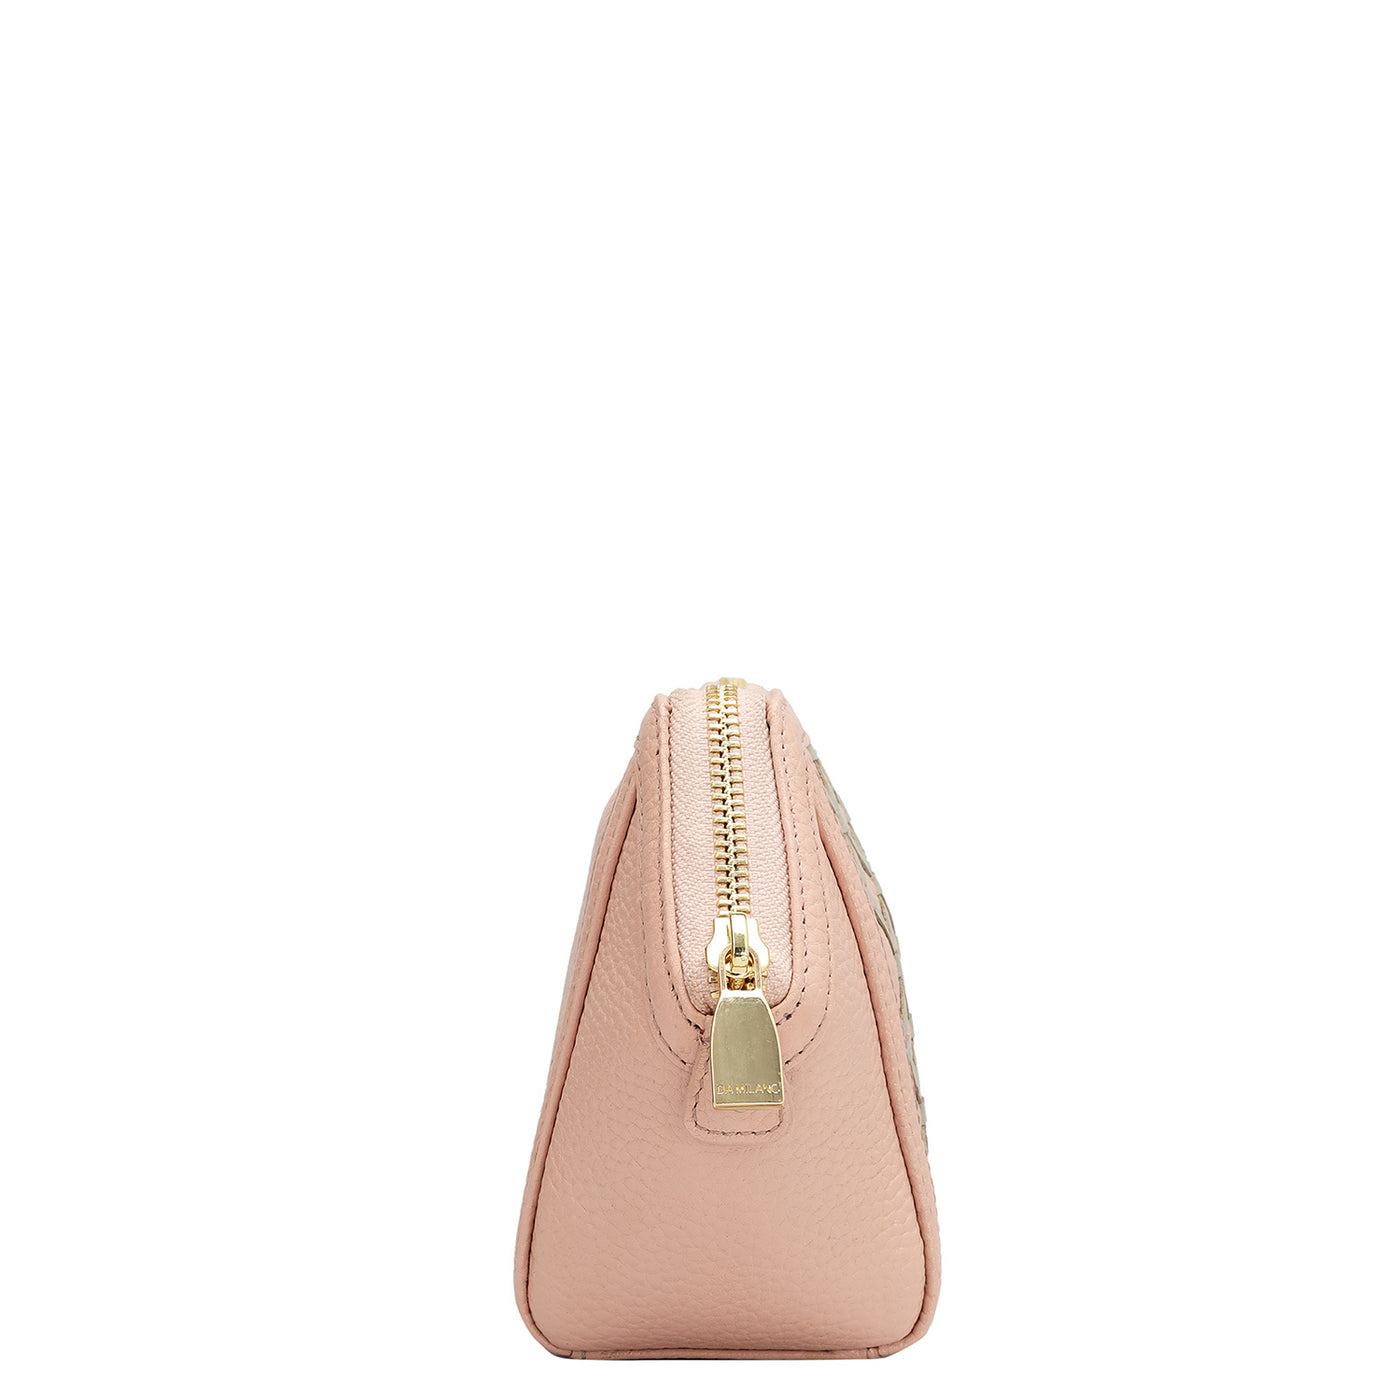 Wax Leather Vanity Pouch - Baby Pink